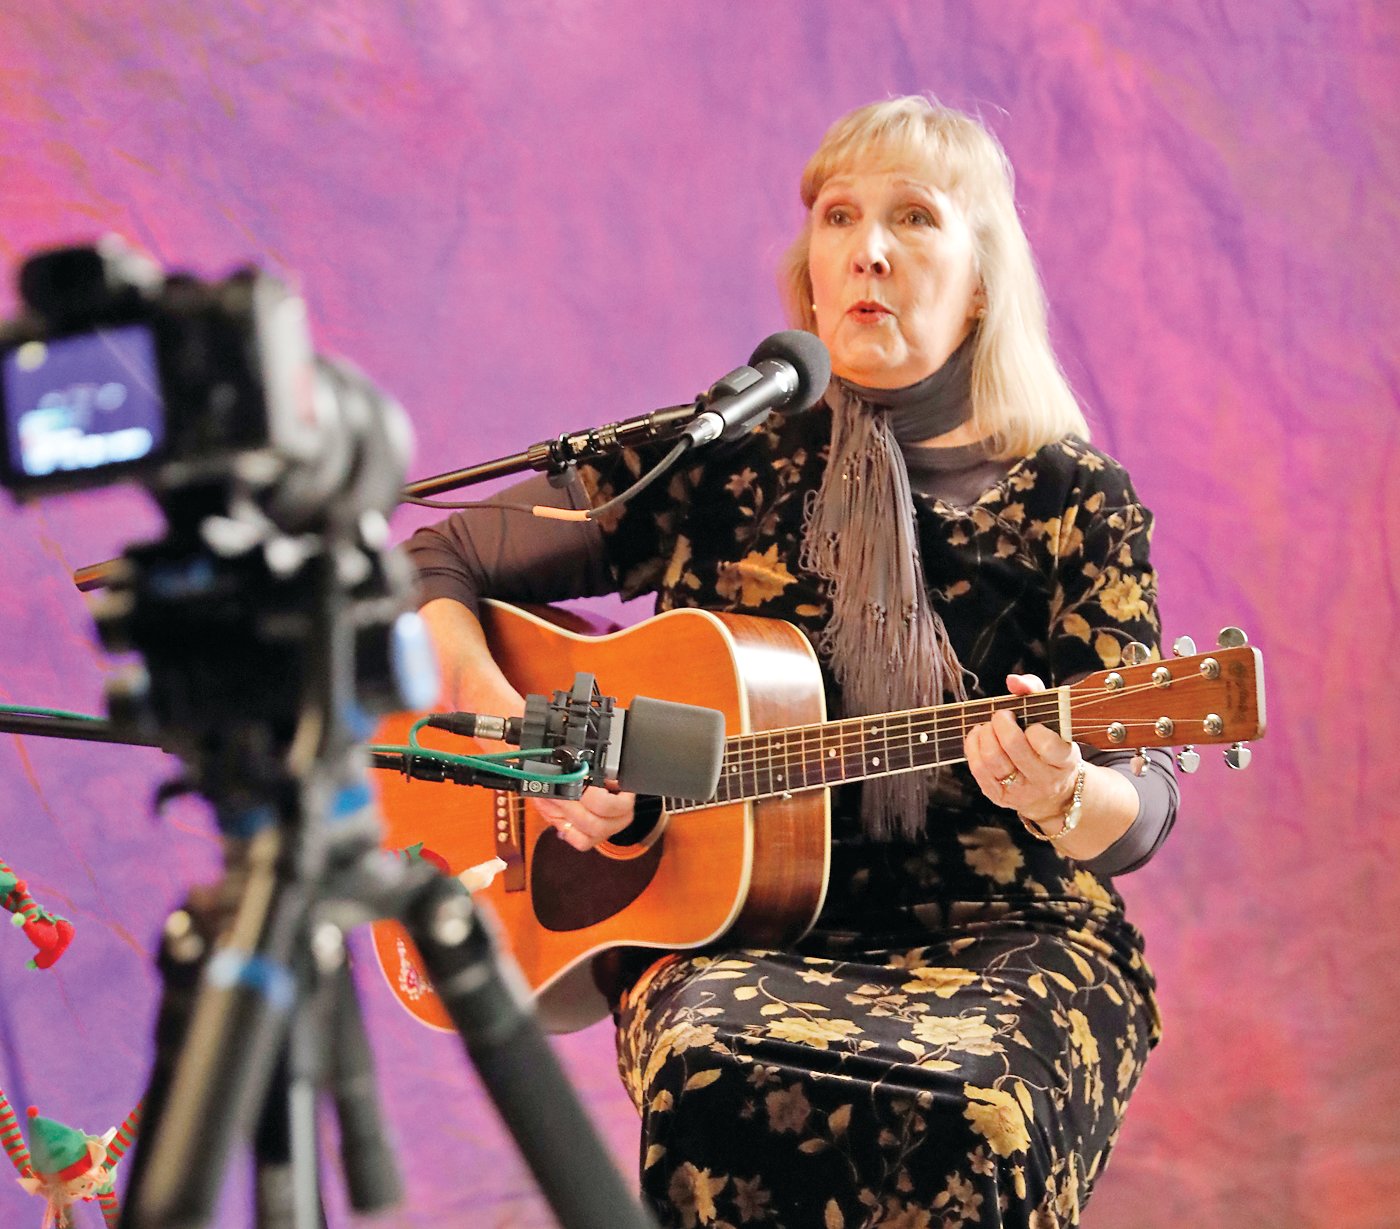 Local musician Barb Cary Hall recorded a Christmas song at the Cykoart Productions Inc. studio for the Celebrate the Season television show. A live premiere event is planned at Ely’s Historic State Theater